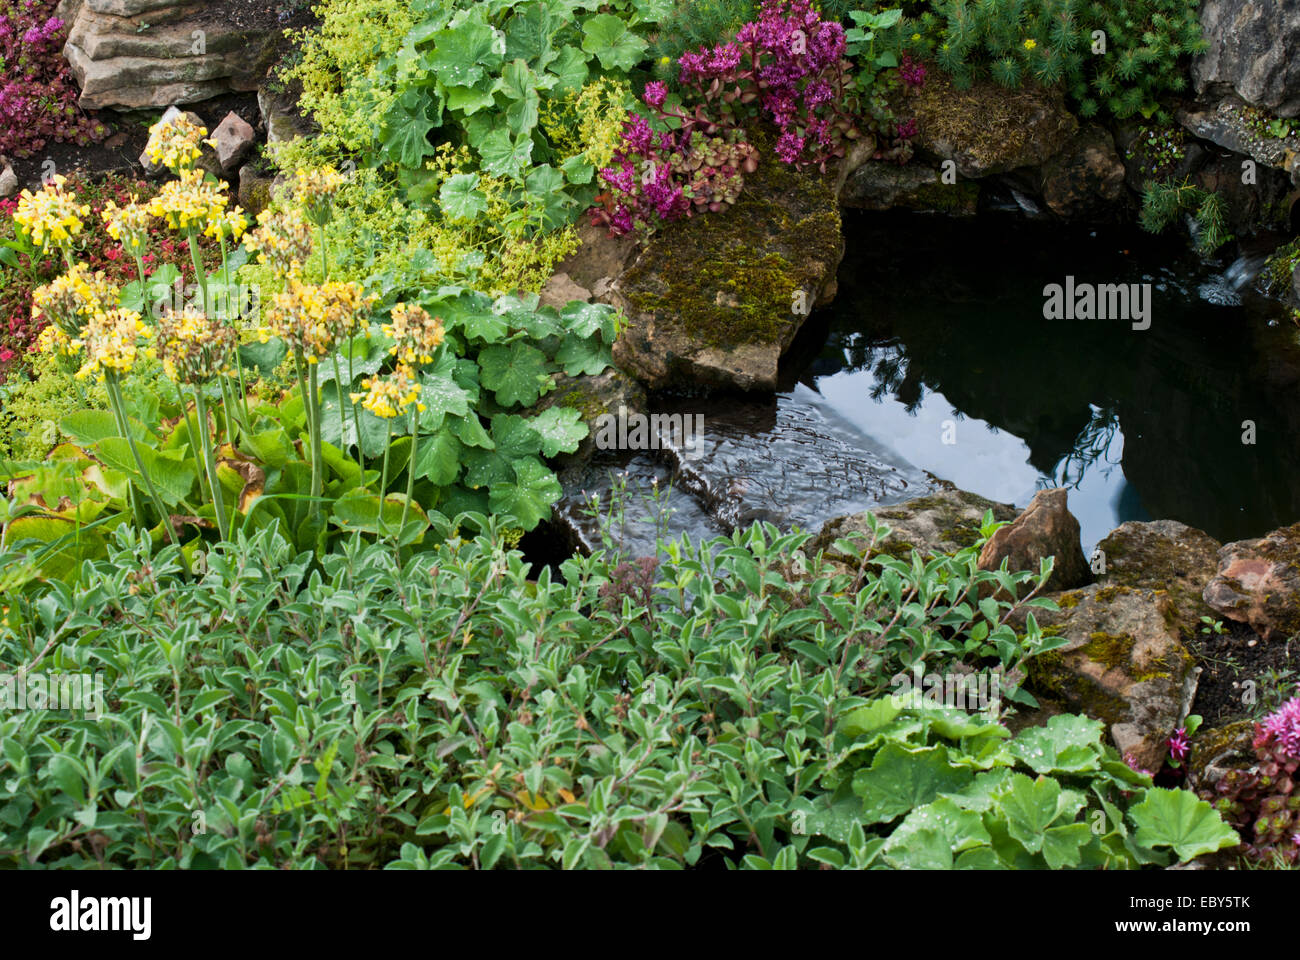 A garden pond surrounded by herbaceous and perennial plants Stock Photo